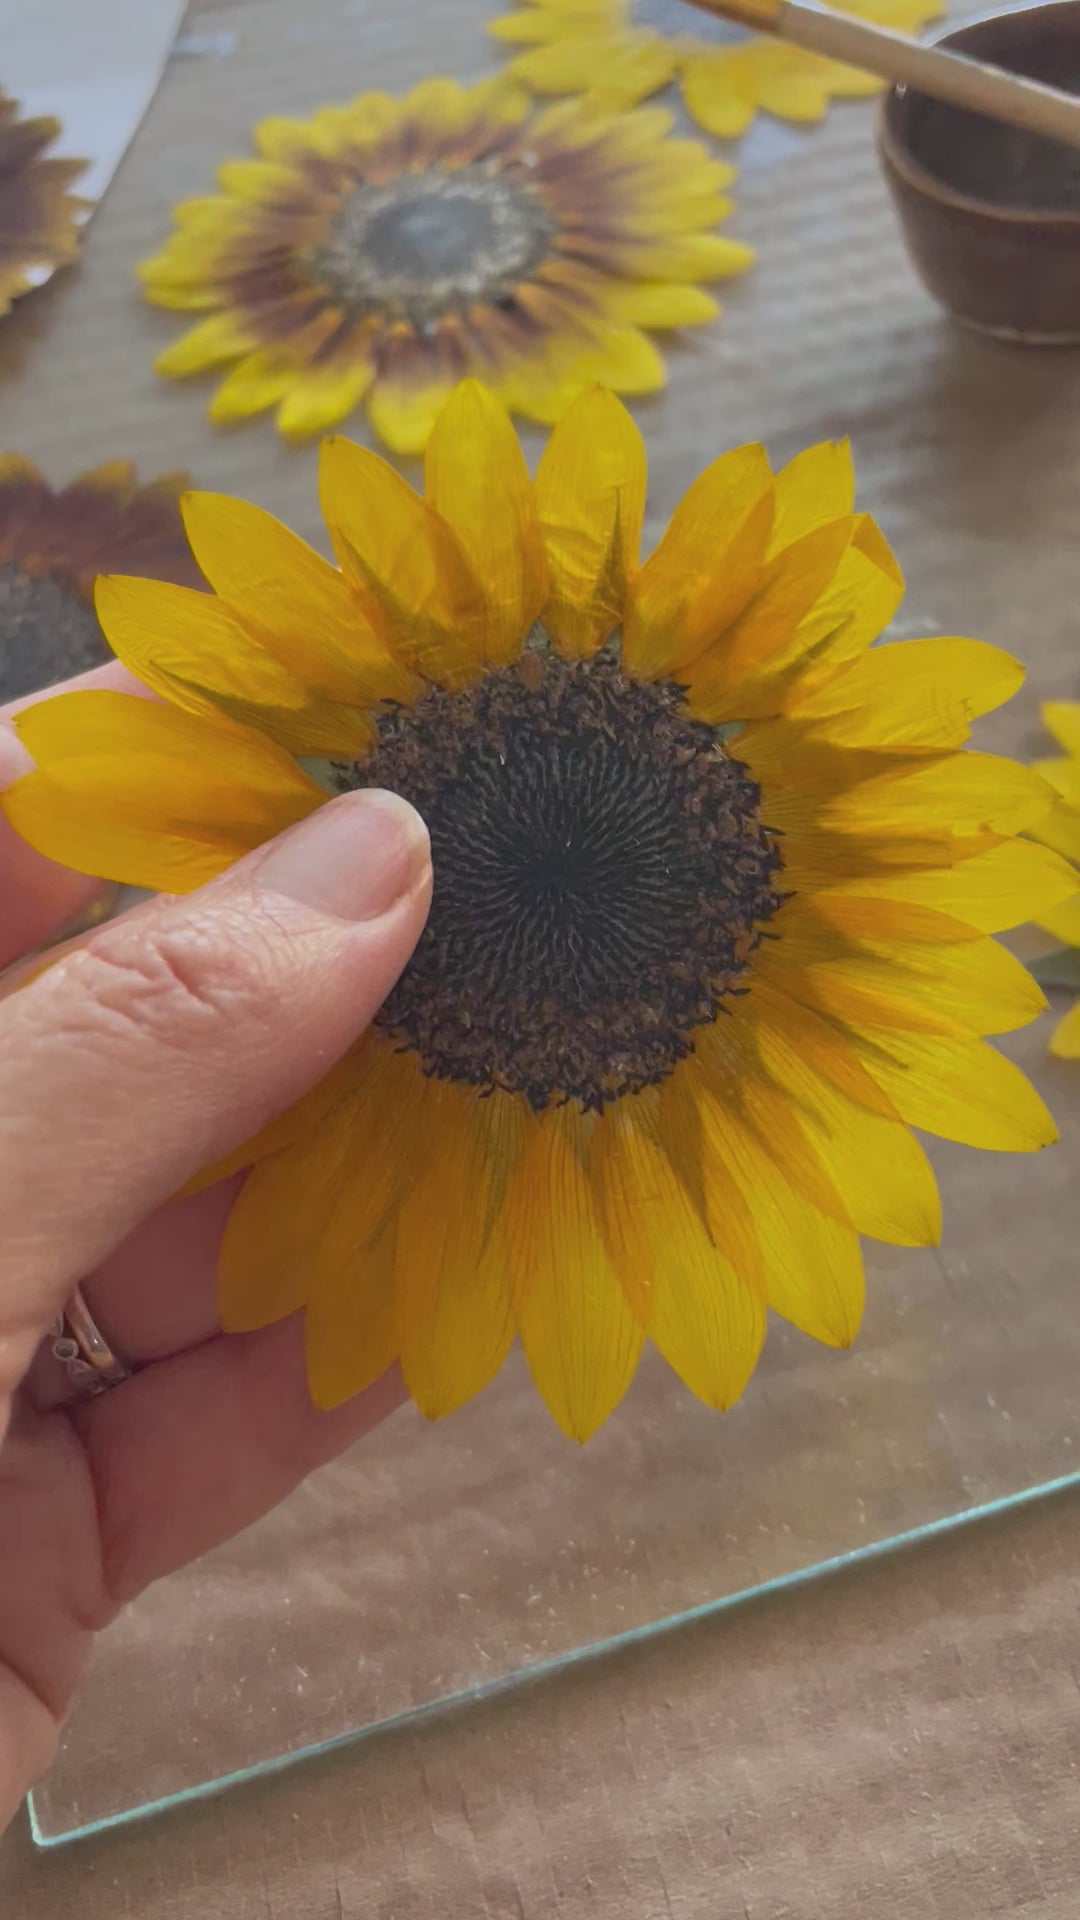 check out how thin a sunflower presses